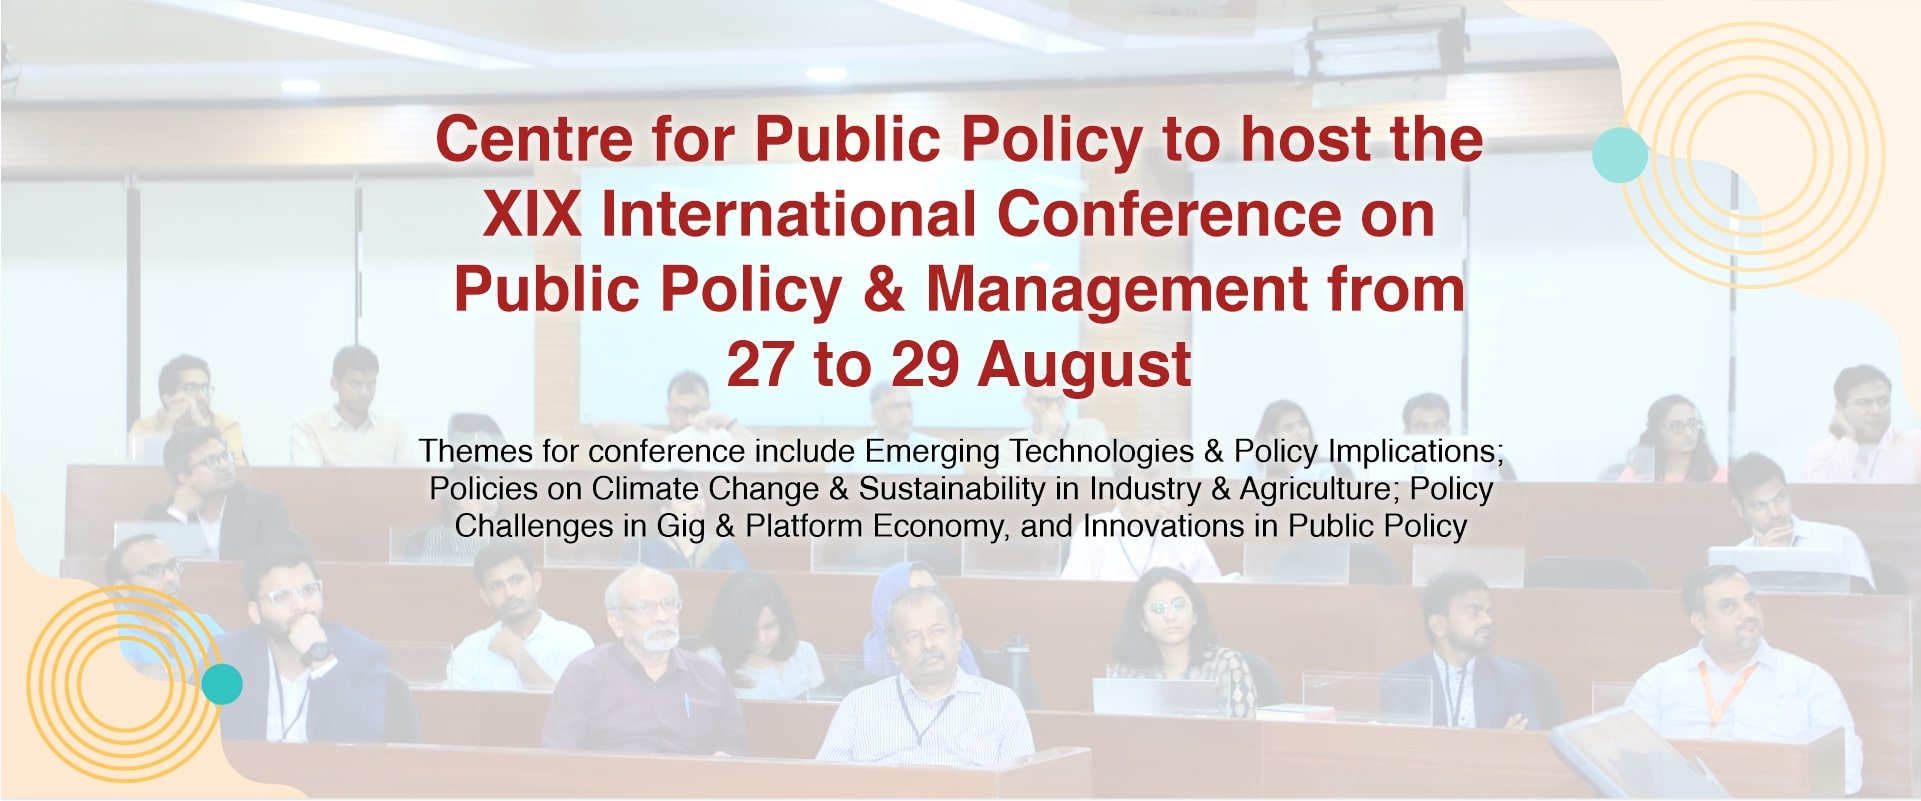 Centre for Public Policy to host the XIX International Conference on Public Policy & Management from 27 to 29 August 